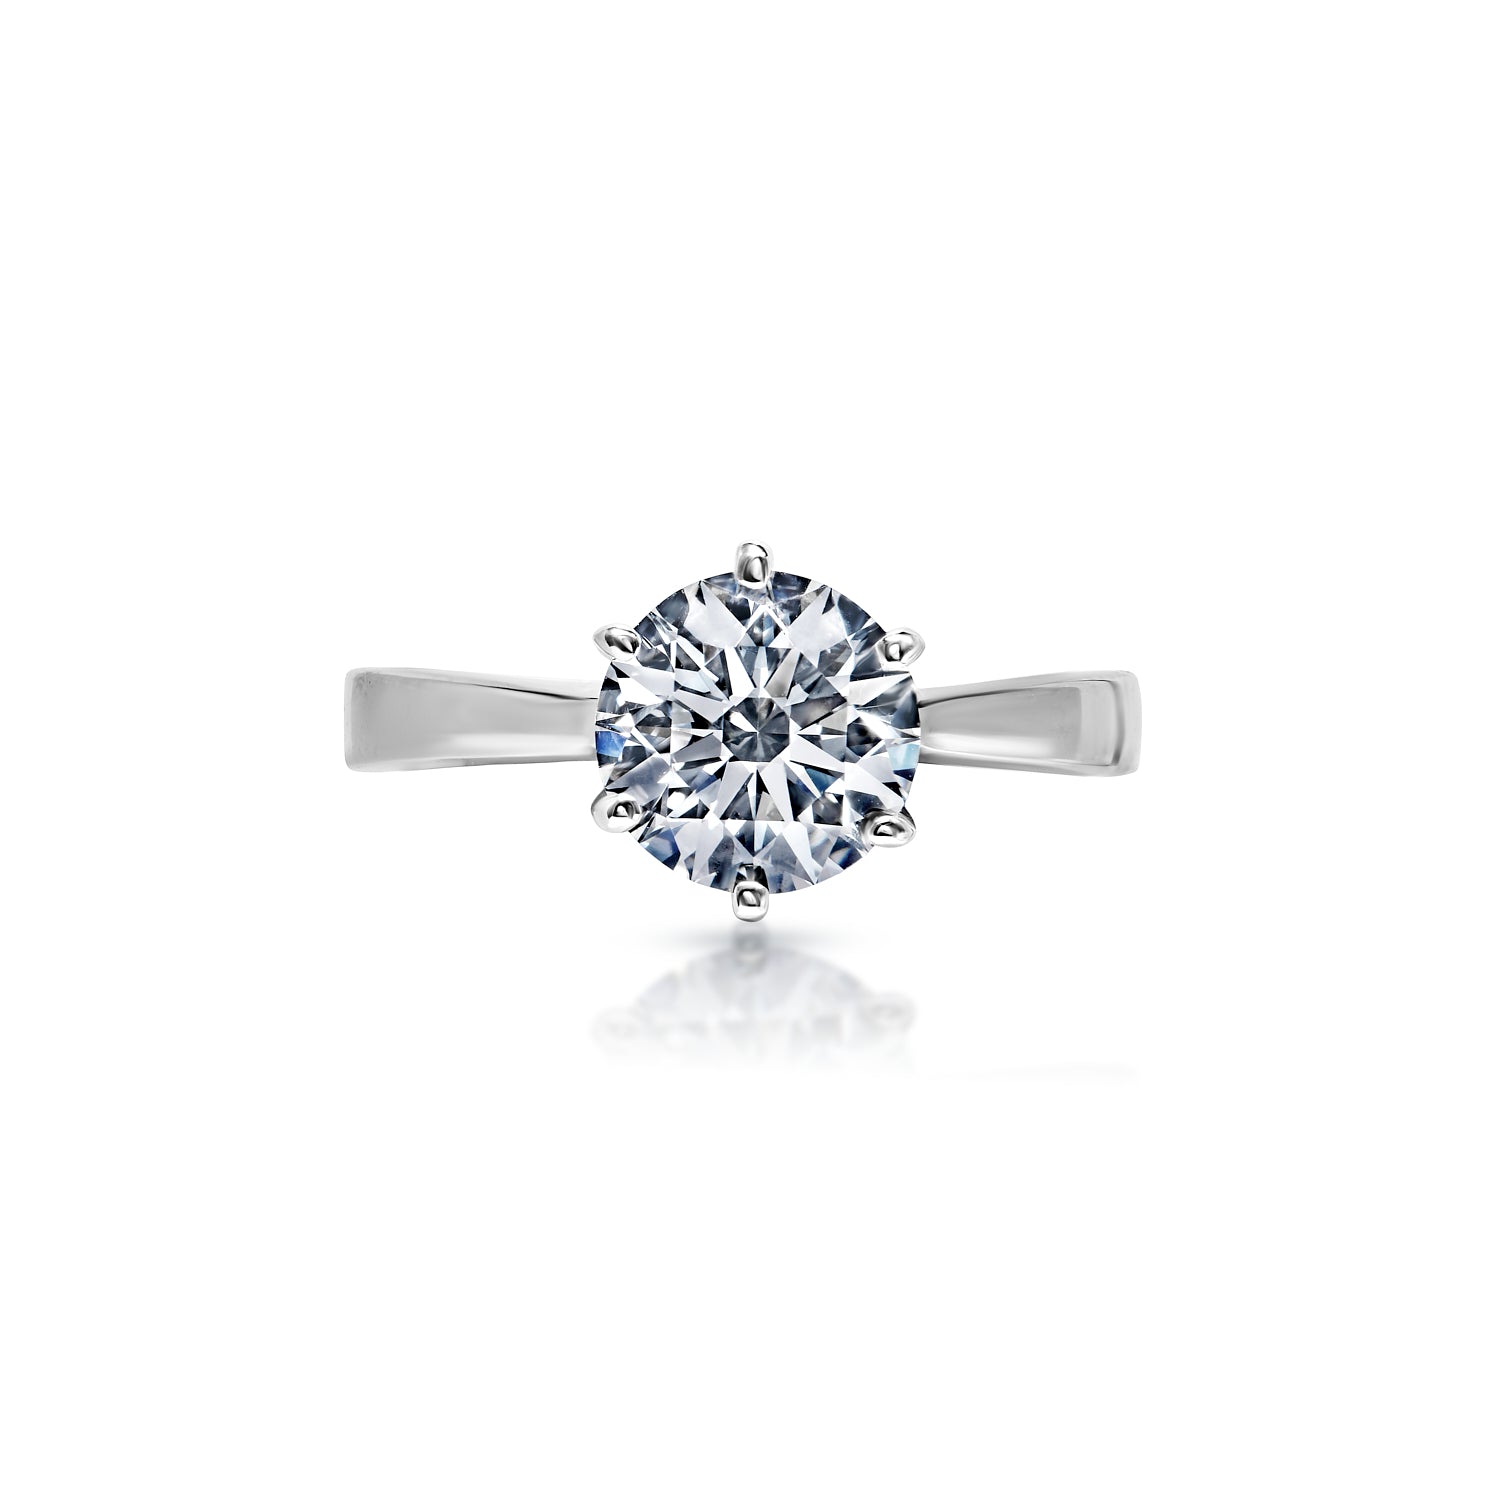 Leiana 1 Carat G VS1 Round Brilliant Diamond Solitaire Engagement Ring Front View